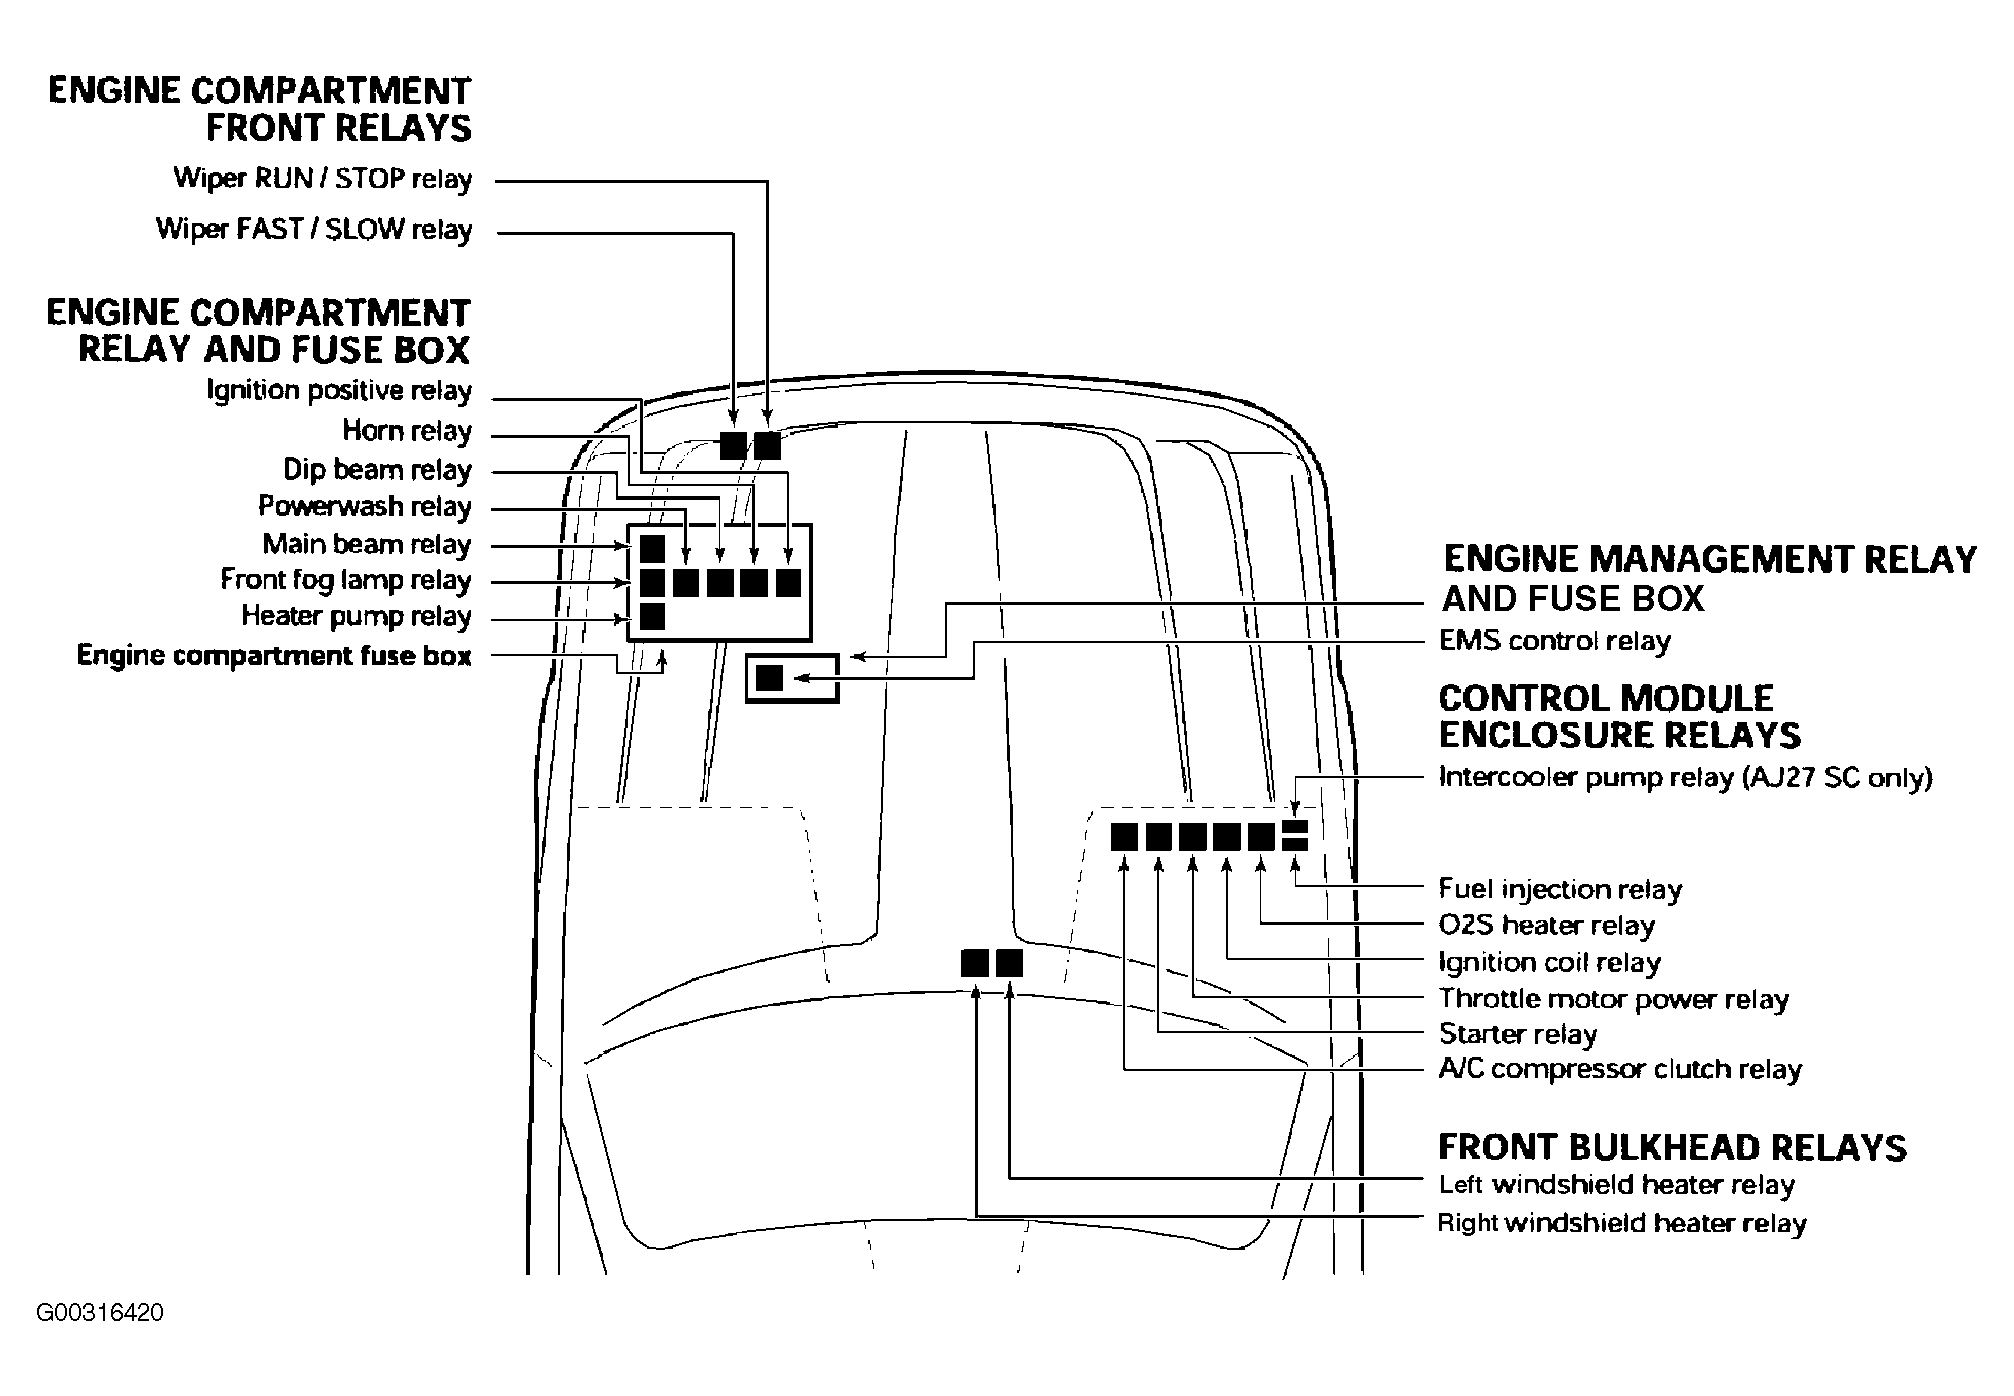 Jaguar XJ8 L 2000 - Component Locations -  Identifying Engine Compartment Fuse/Relay Locations